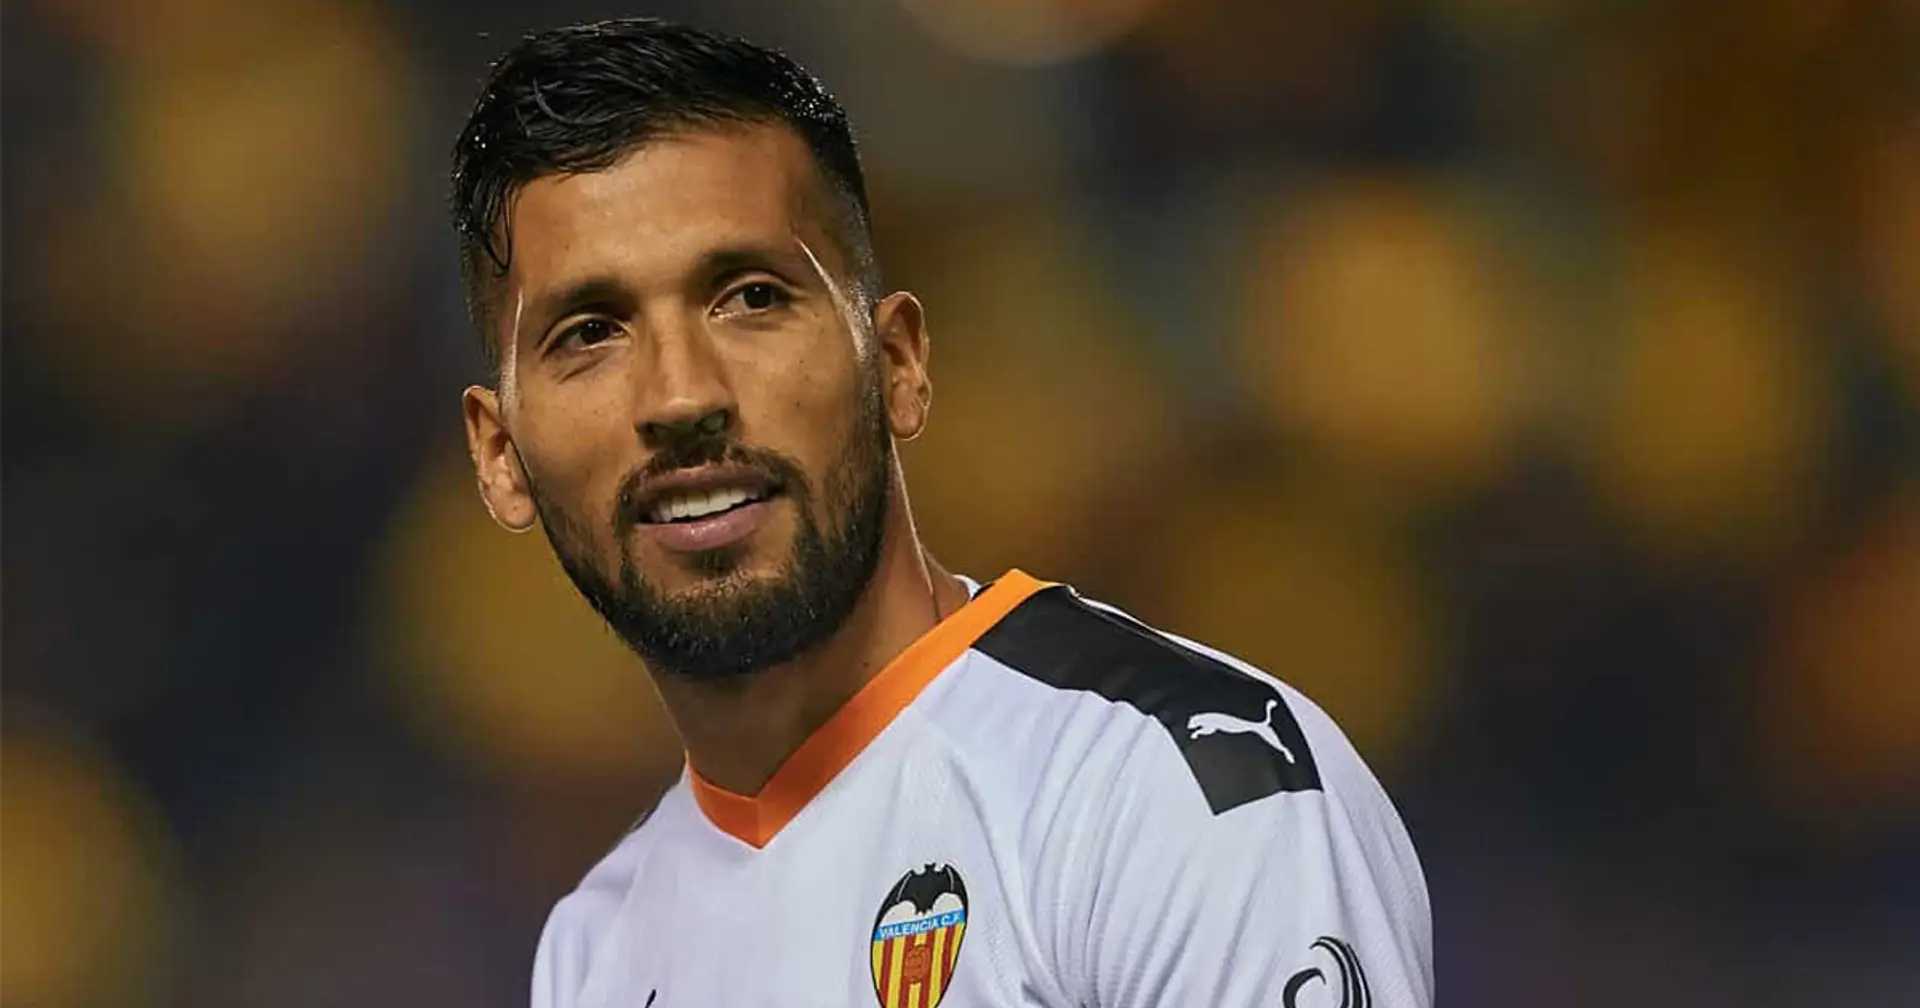 Barcelona could sign ex-Real Madrid centre-back Ezequiel Garay as emergency back-up (reliability: 4 stars)